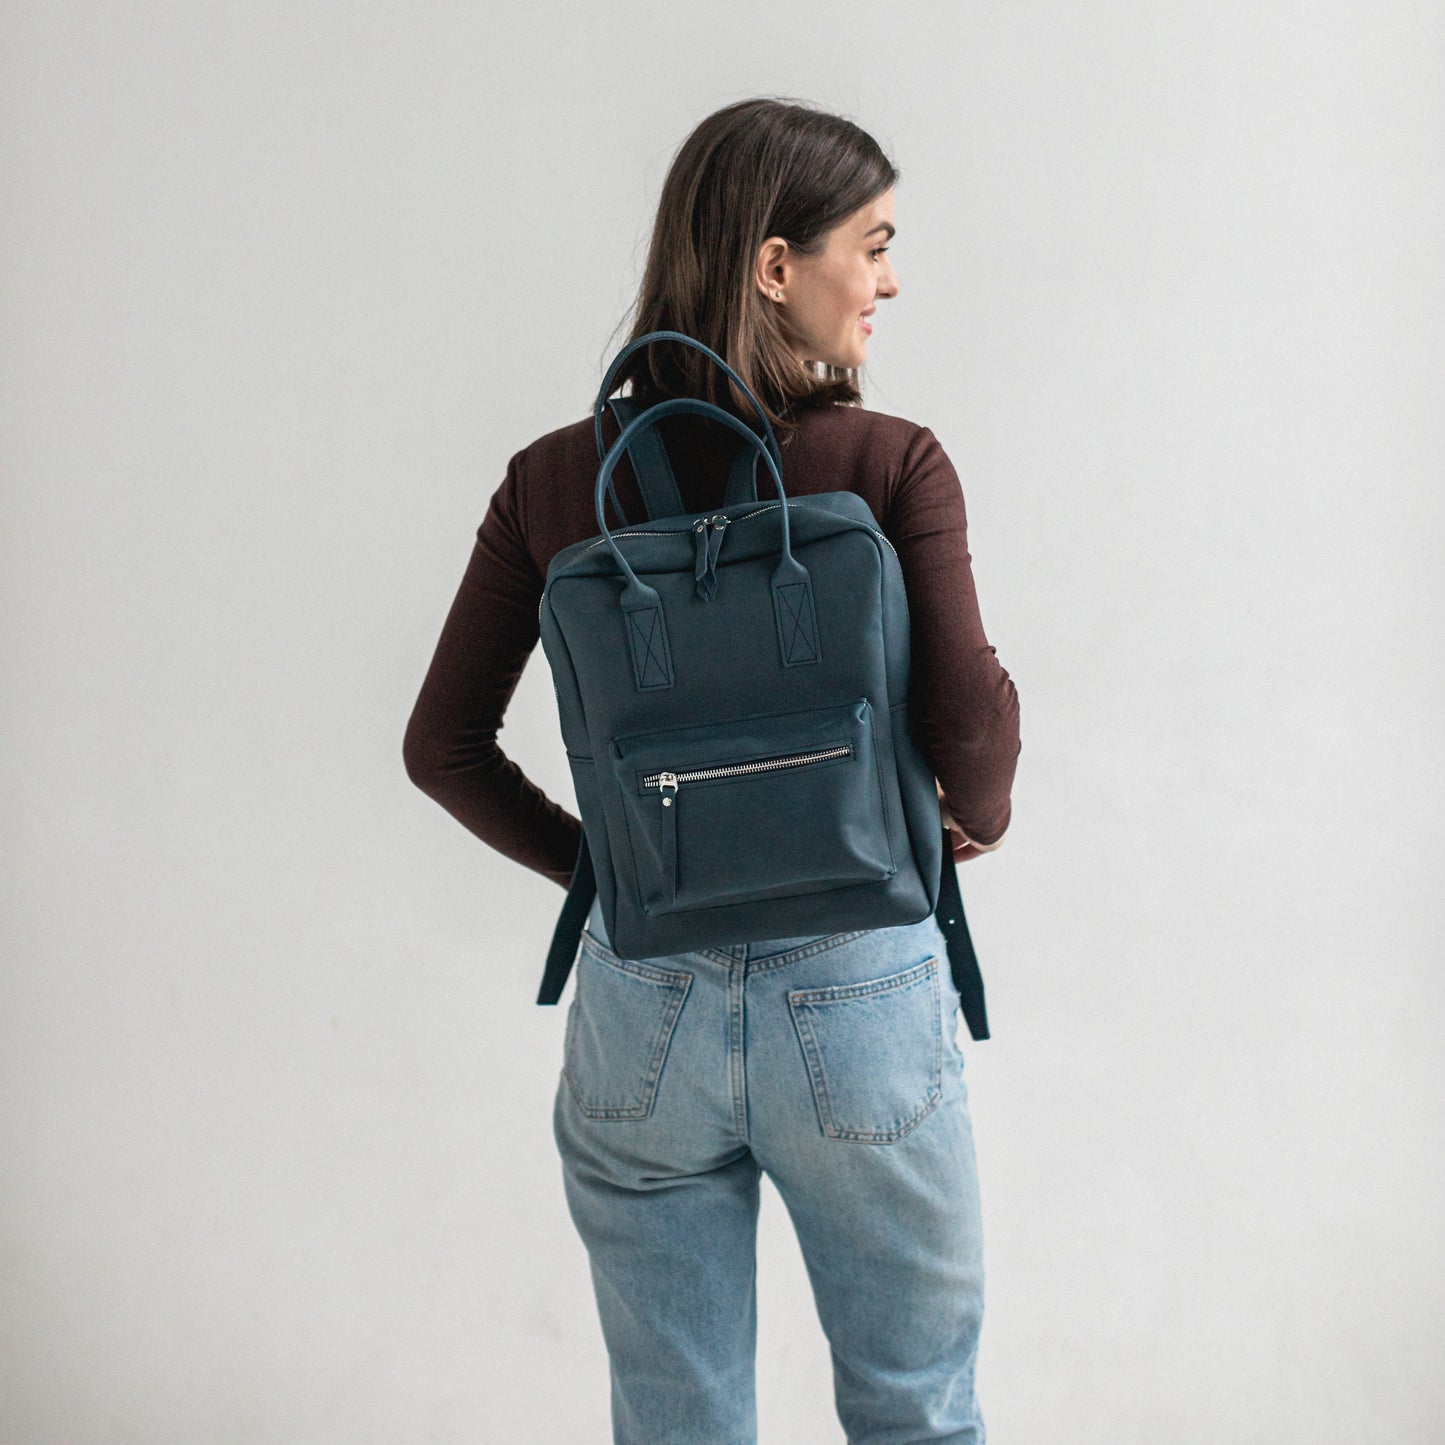 Navy blue leather city backpack